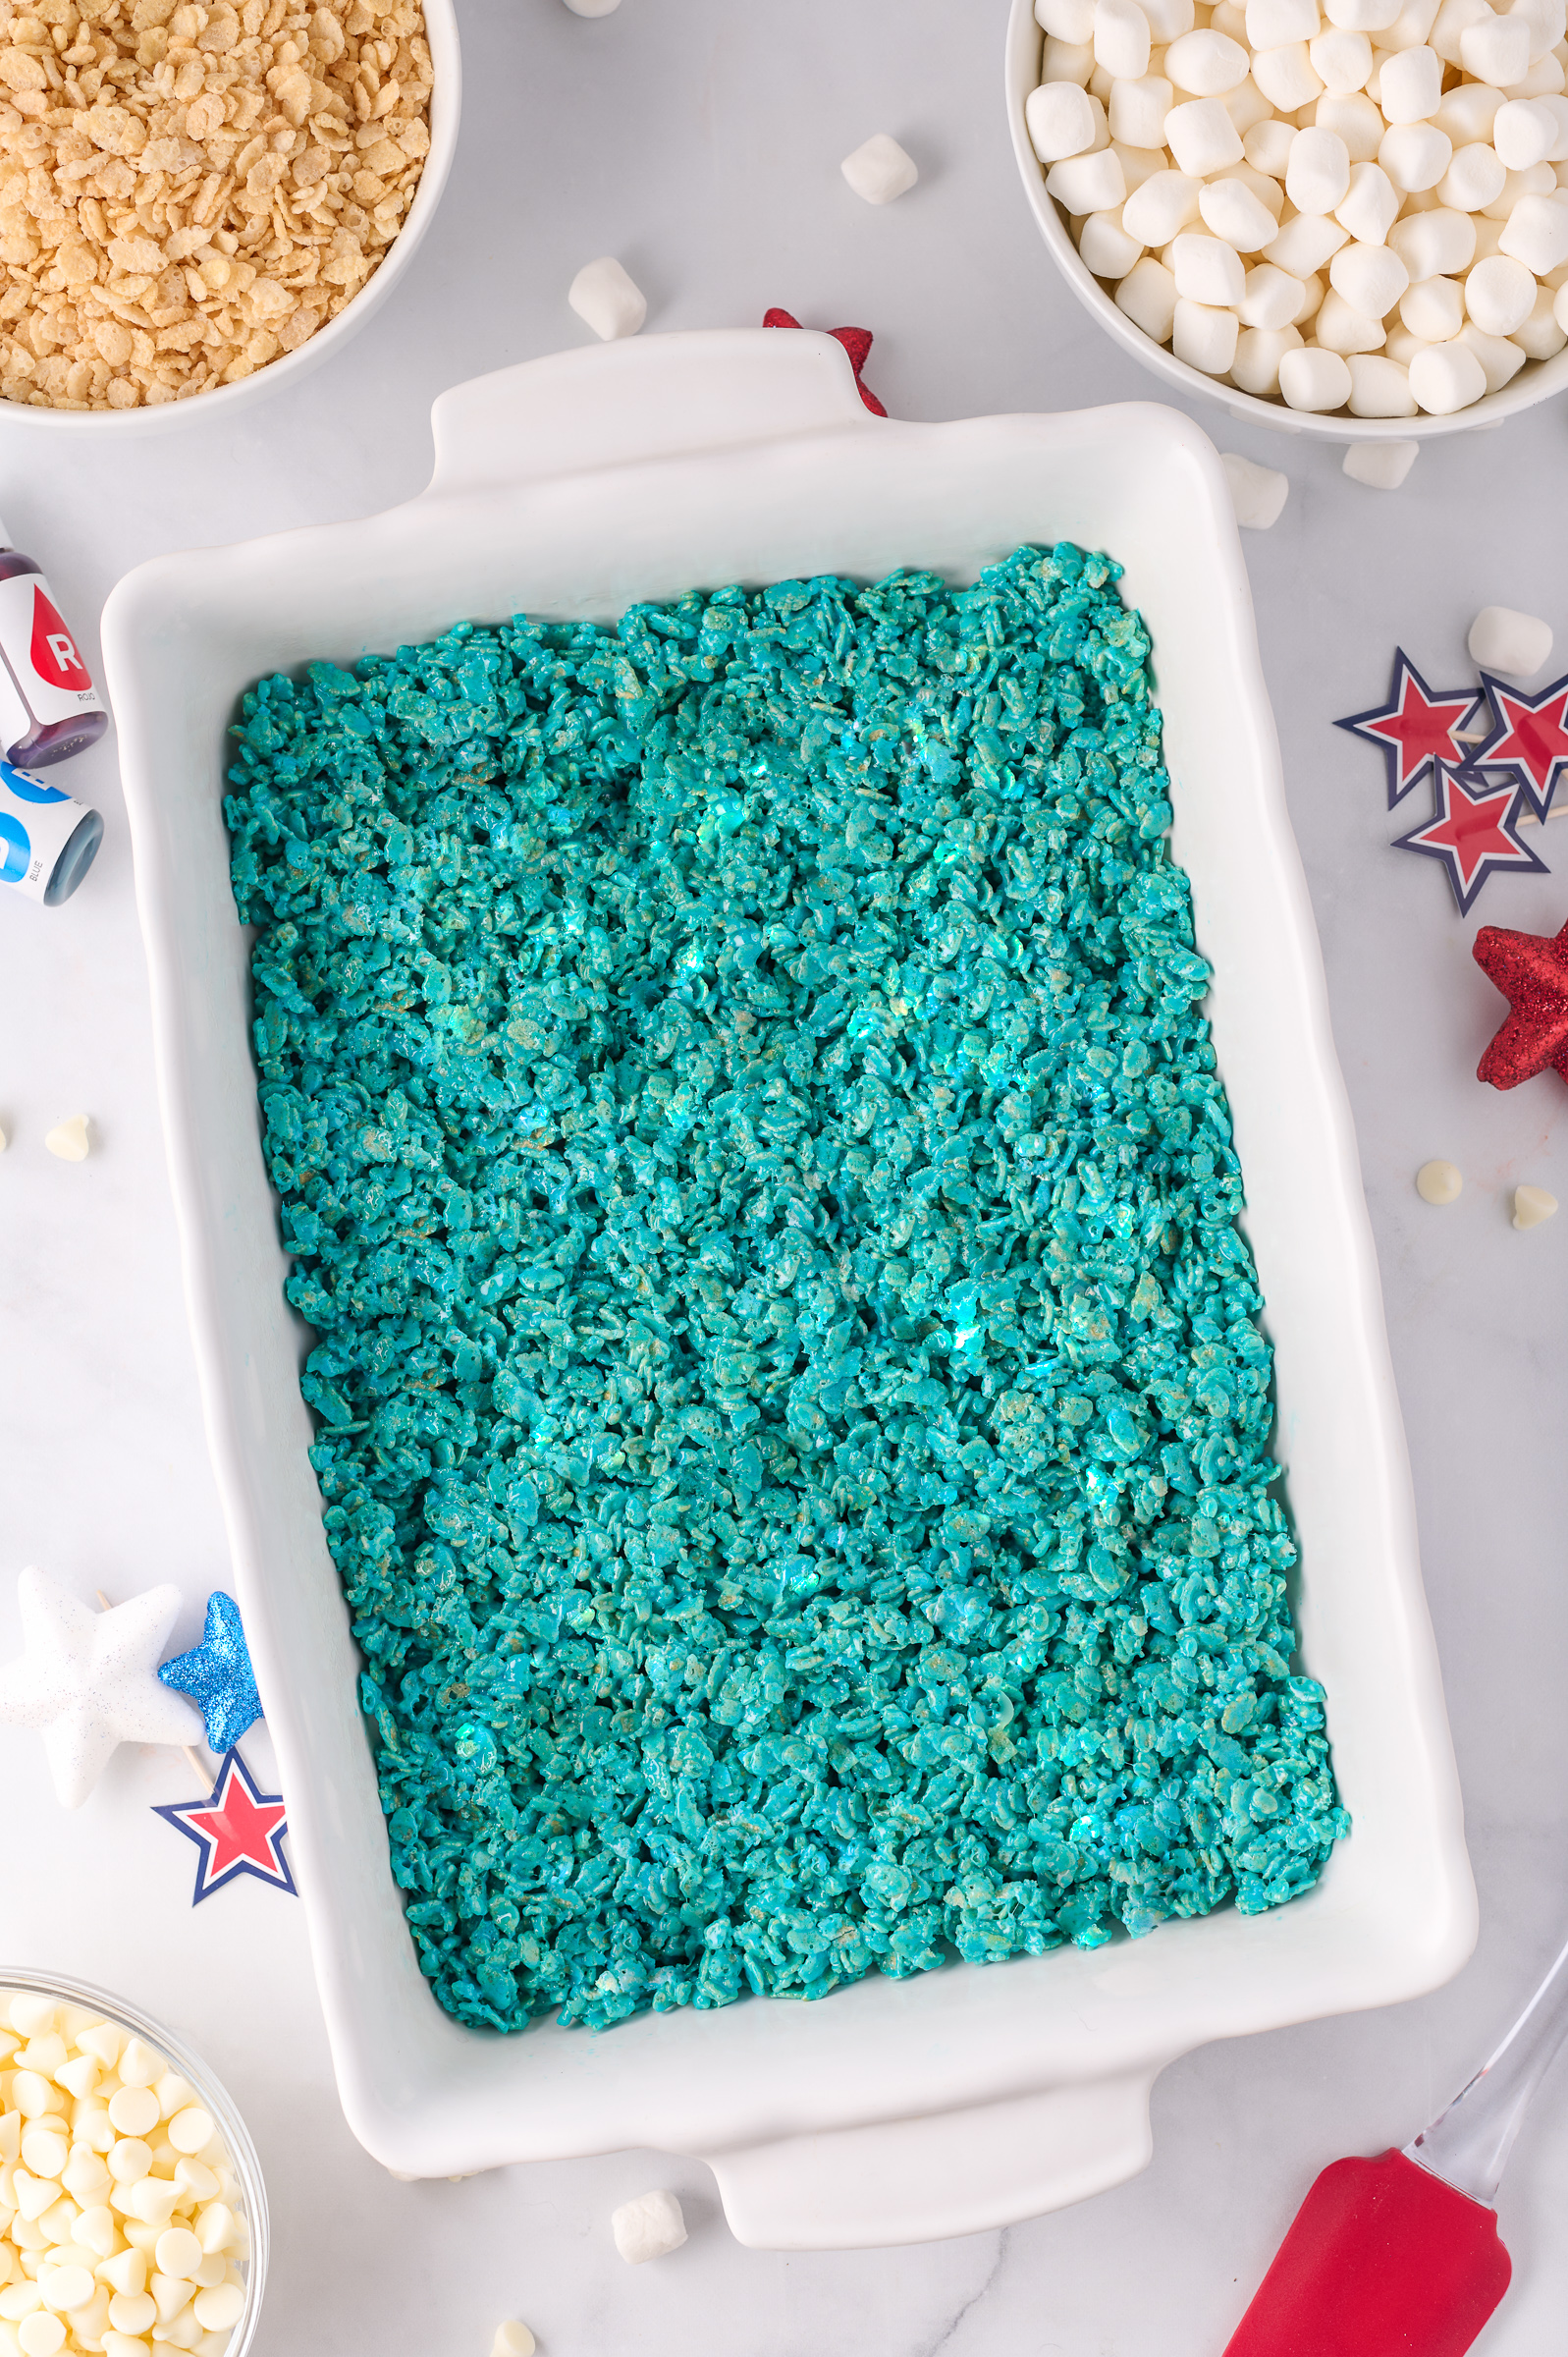 Marshmallow rice krispie mix dyed blue pressed into a white 9 x 13 baking dish with the recipe ingredients surrounding it.